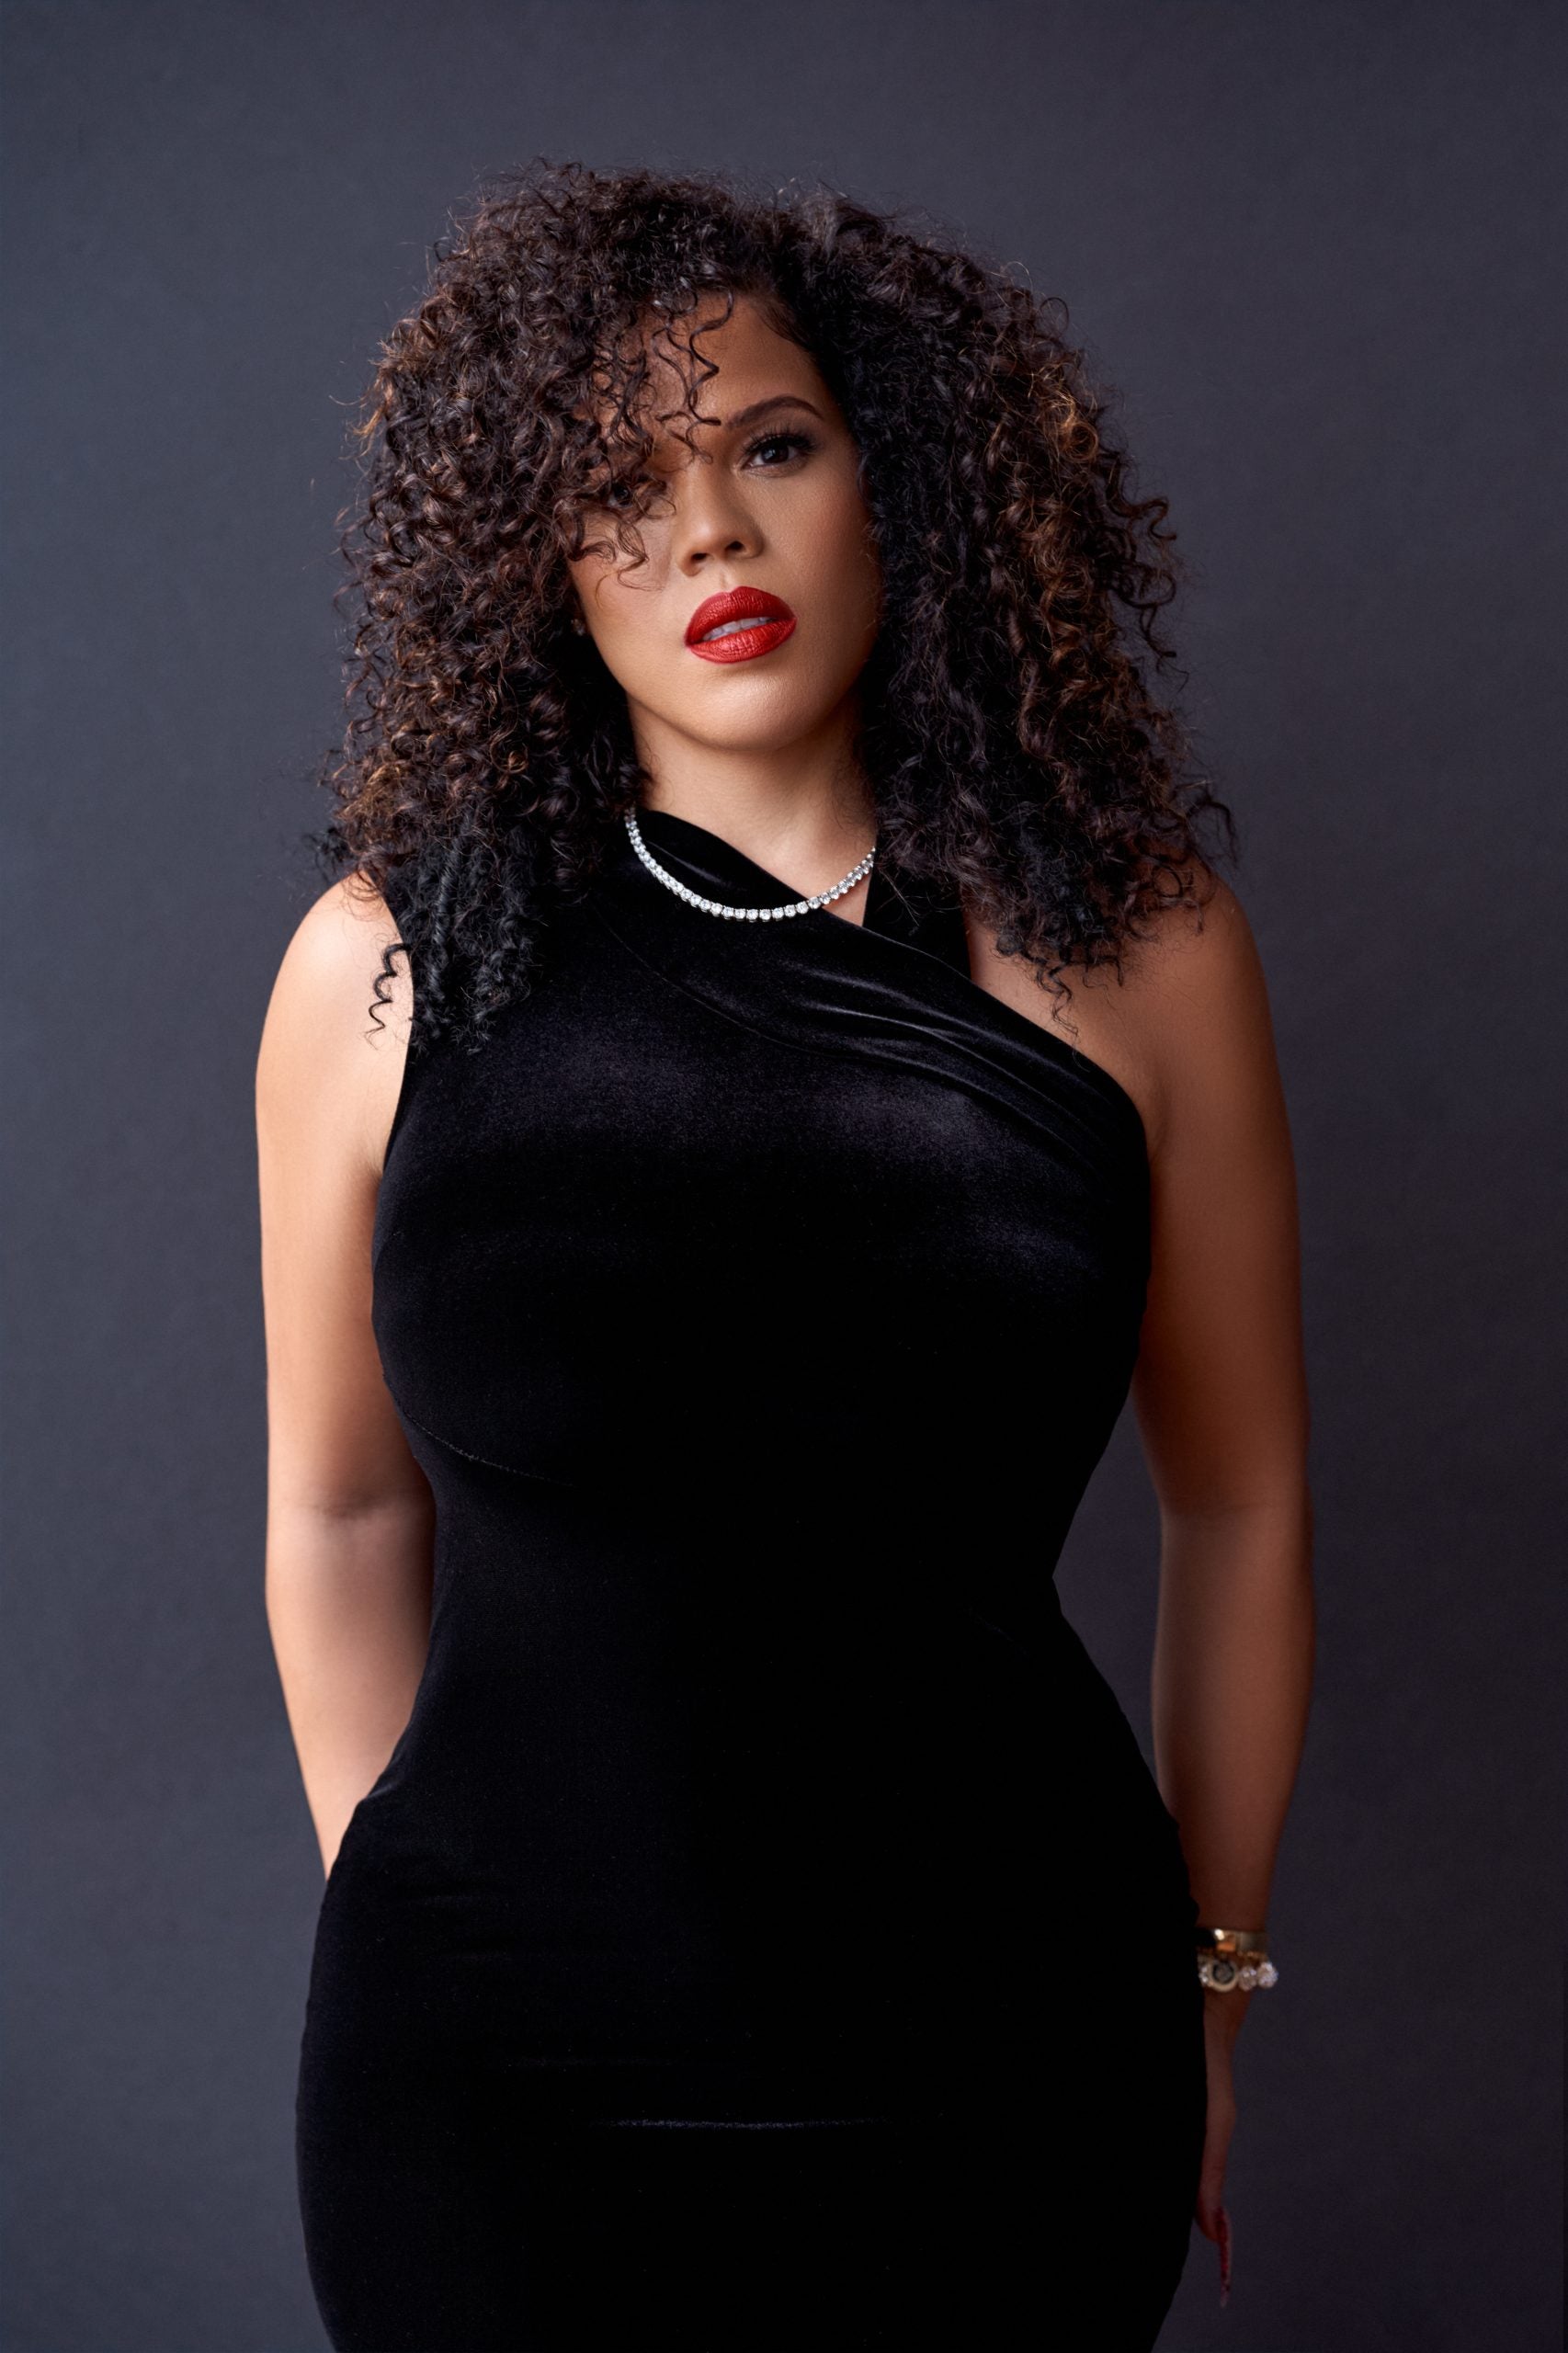 TT Torrez On How Black Female Rappers Have Consistently ‘Contributed To The Culture’